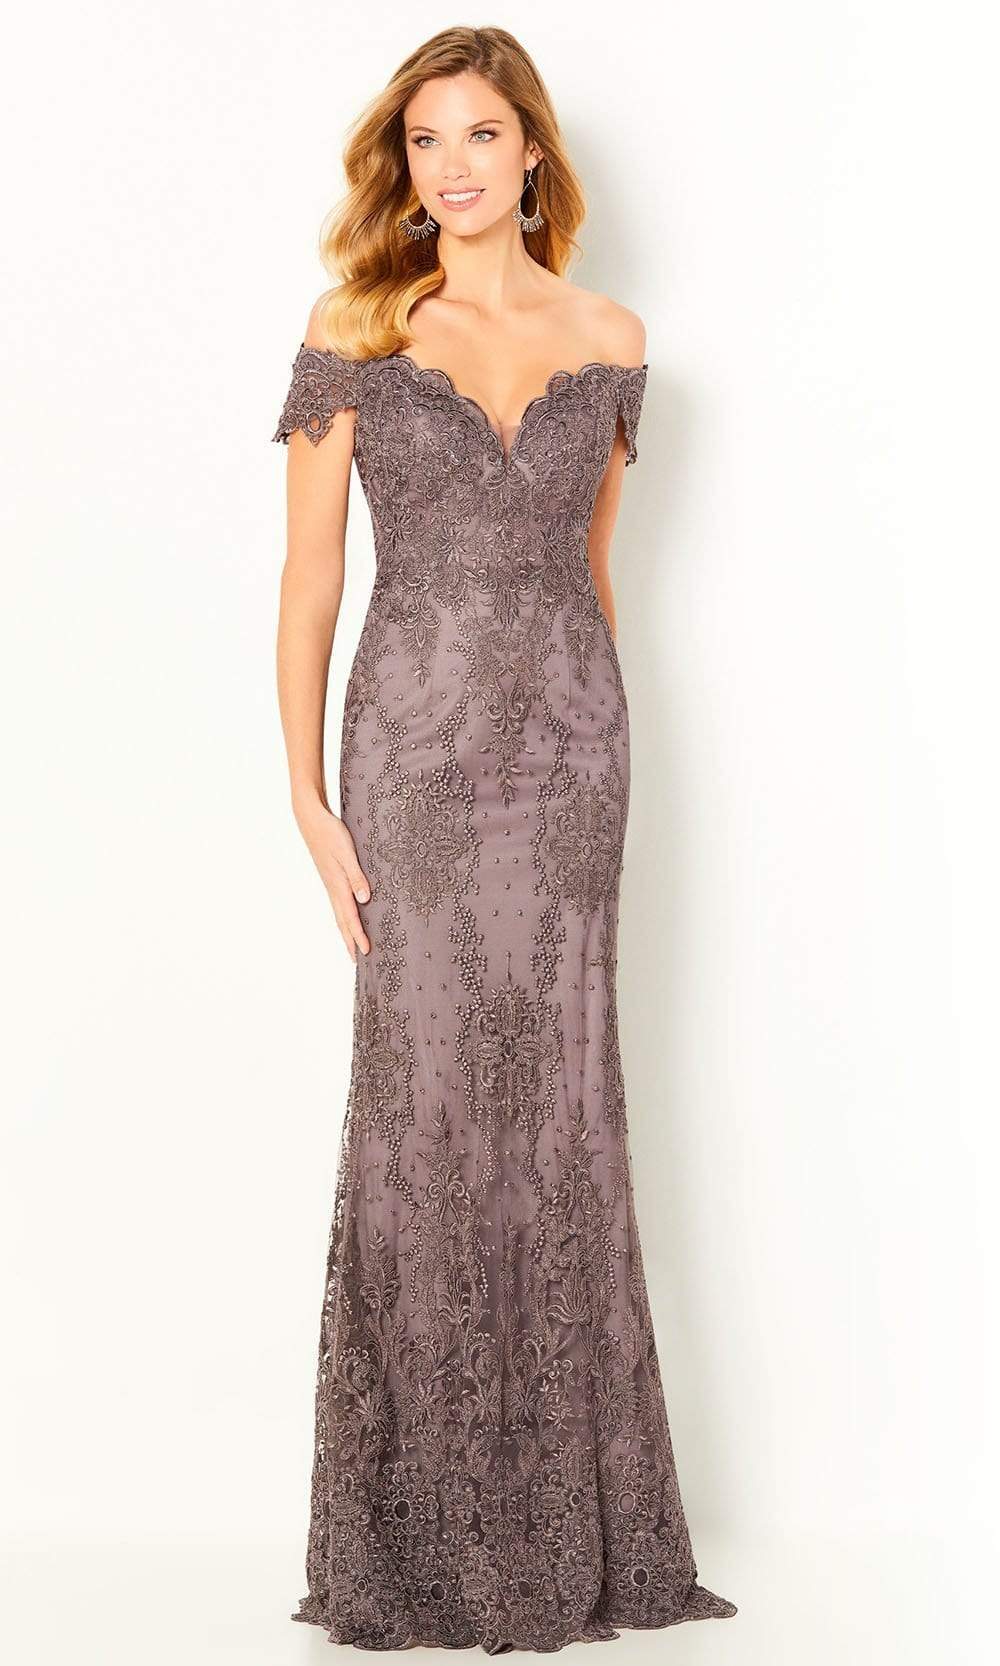 Cameron Blake - 220631 Lace Mermaid Mother of the Bride Gown
